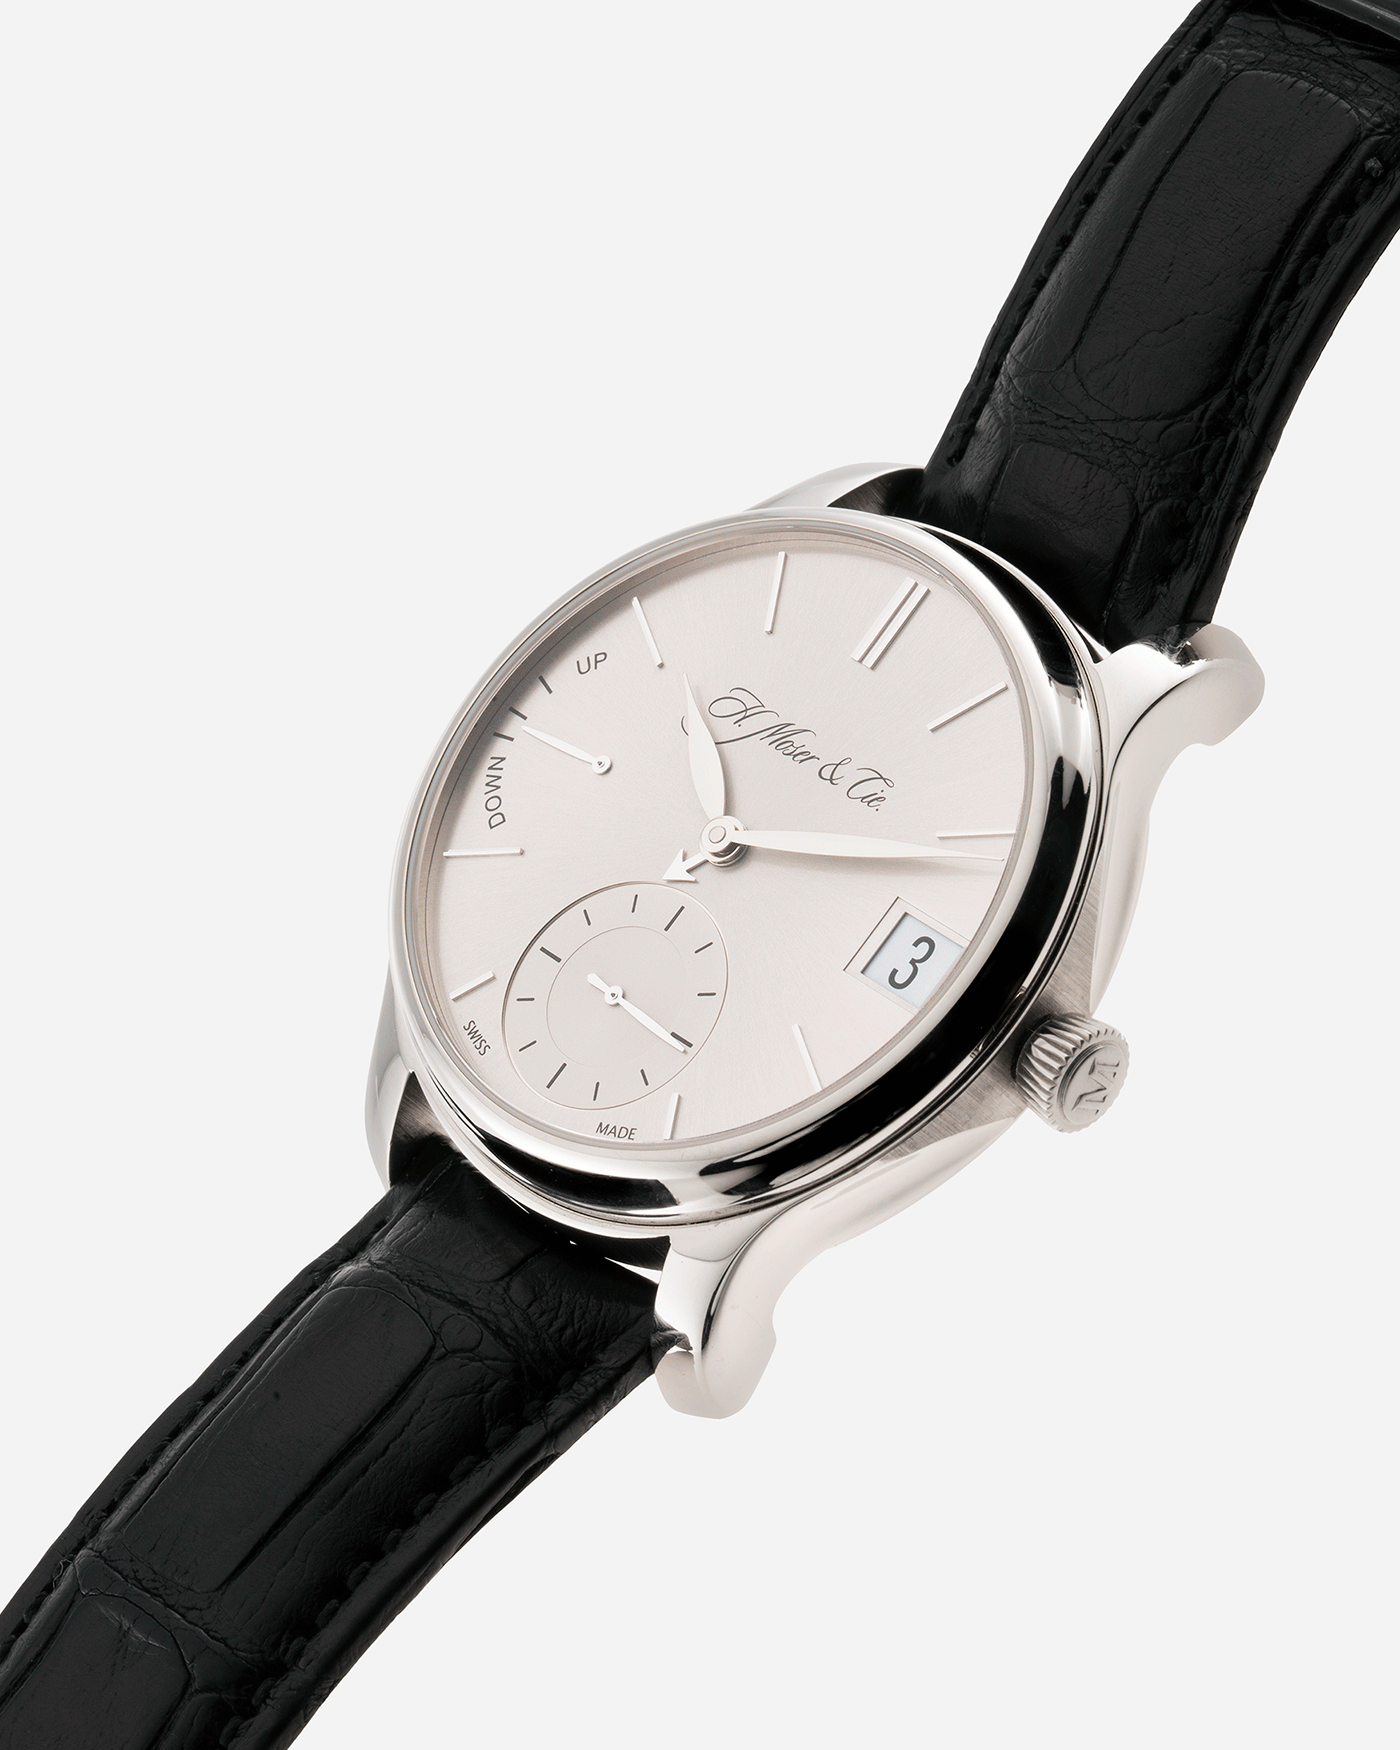 Brand: H.Moser & Cie Year: 2013 Model: Endeavour Perpetual Reference Number: 341.501-002 Material: 18k White Gold Movement: Manually wound Caliber HMC 341.501 Case Diameter: 40.8mm Bracelet/Strap: H. Moser & Cie Black Alligator Leather Strap with matching 18k White Gold Tang Buckle